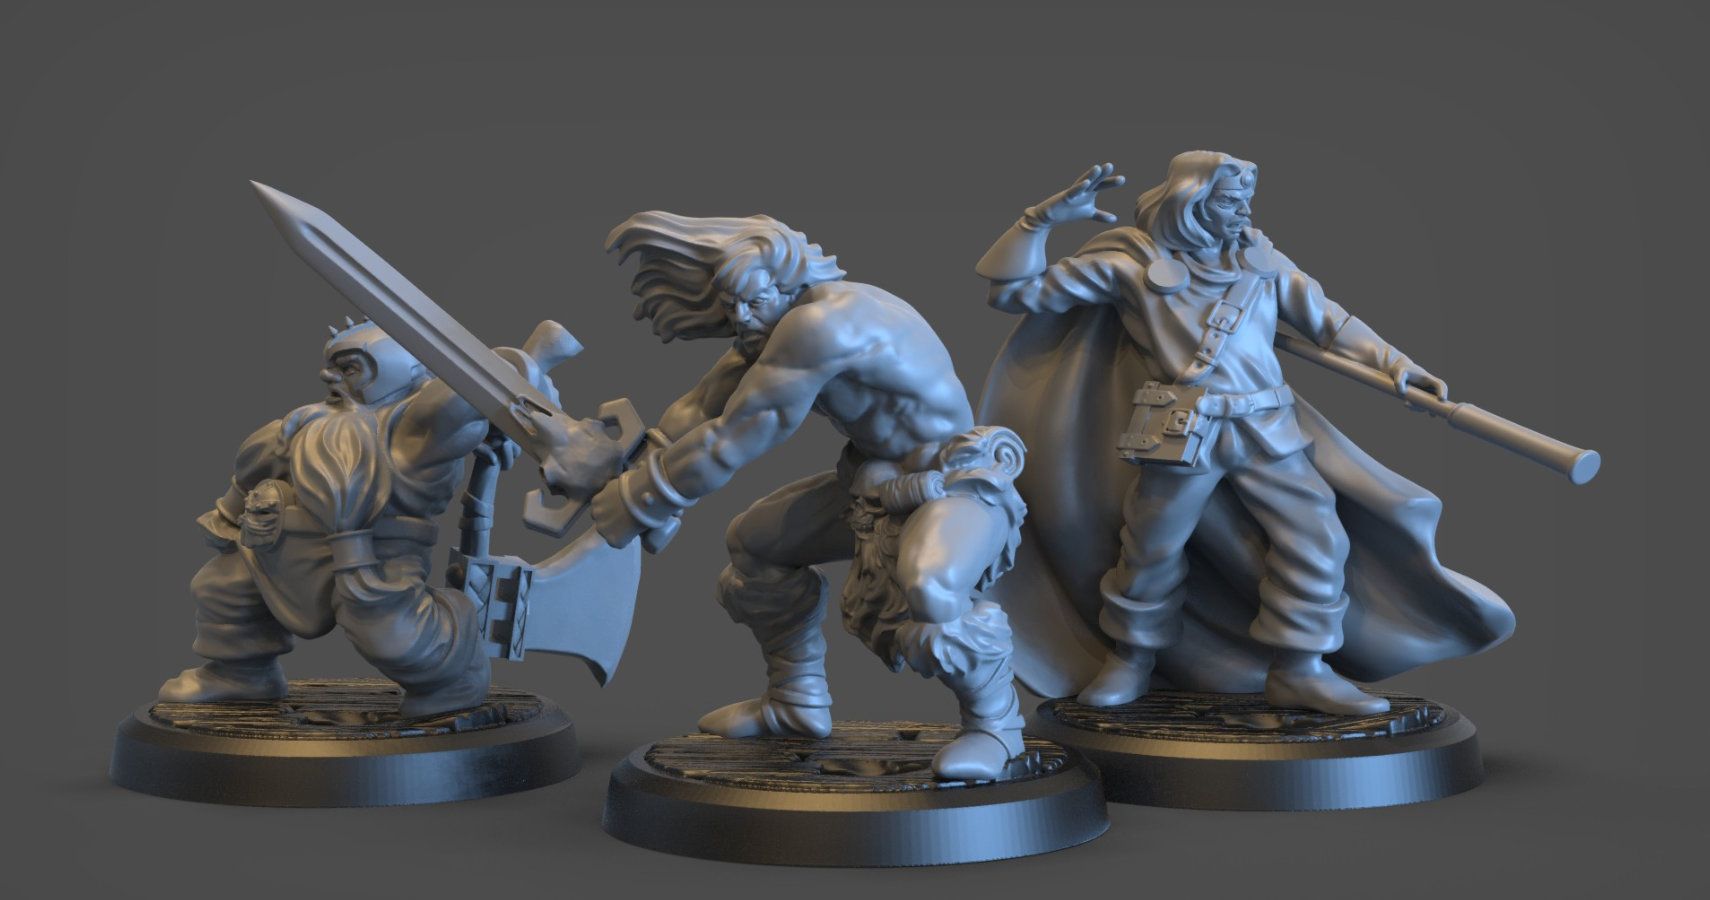 How 3D Can Your Tabletop Part 3 - Printing Miniatures